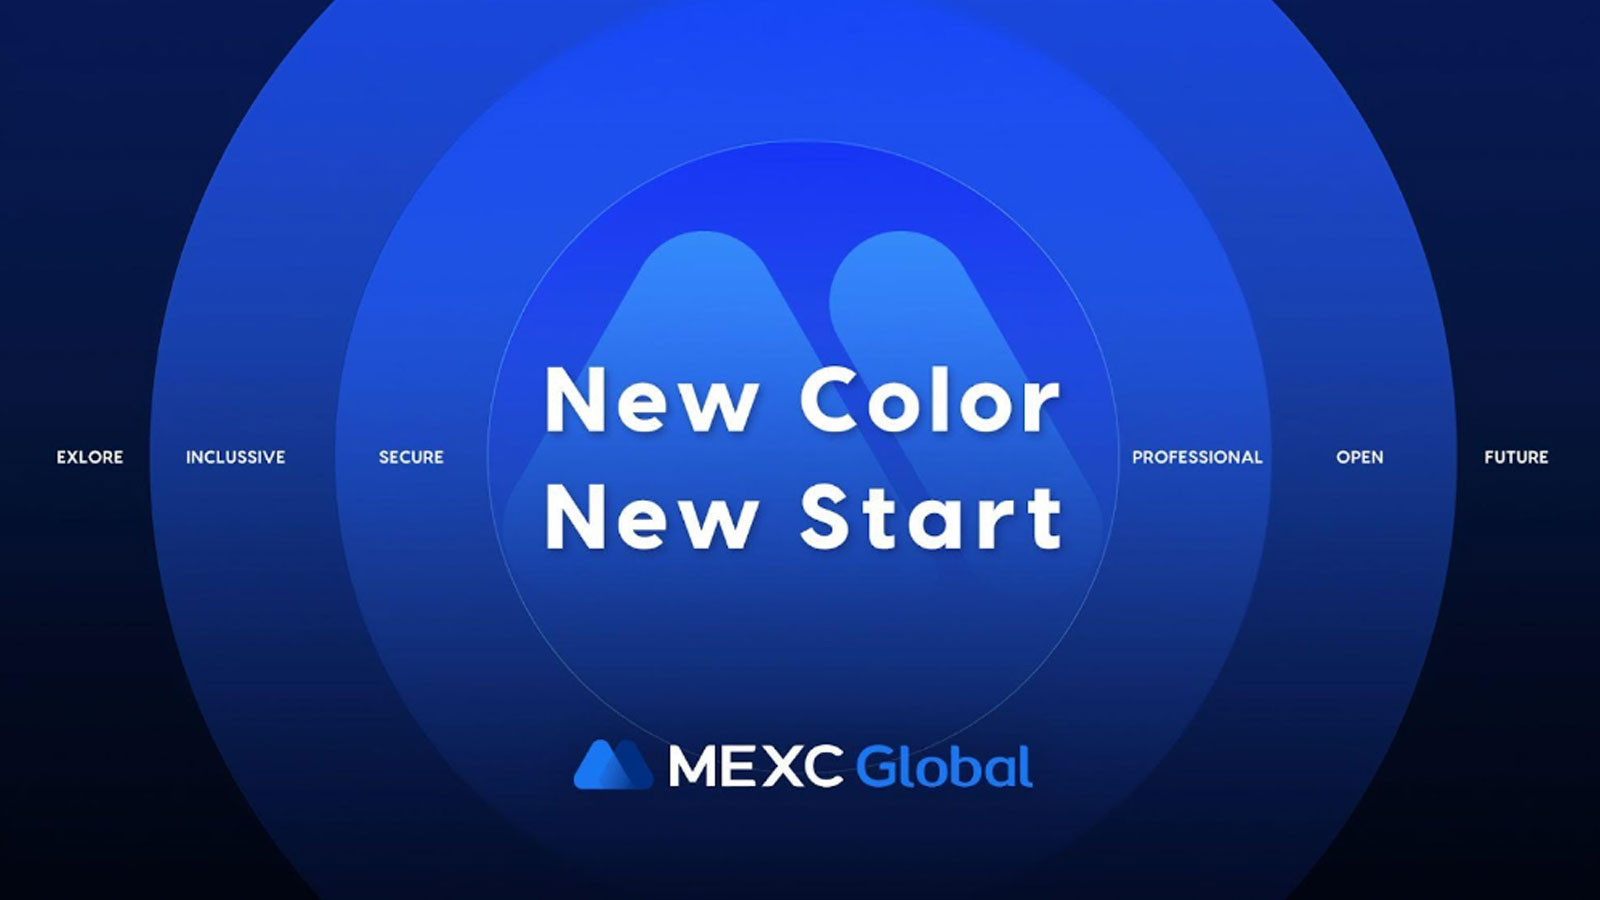 MEXC Global Now Exceeds 10 Million Users; The Meaning Behind the Upgrade Color to “Ocean Blue”